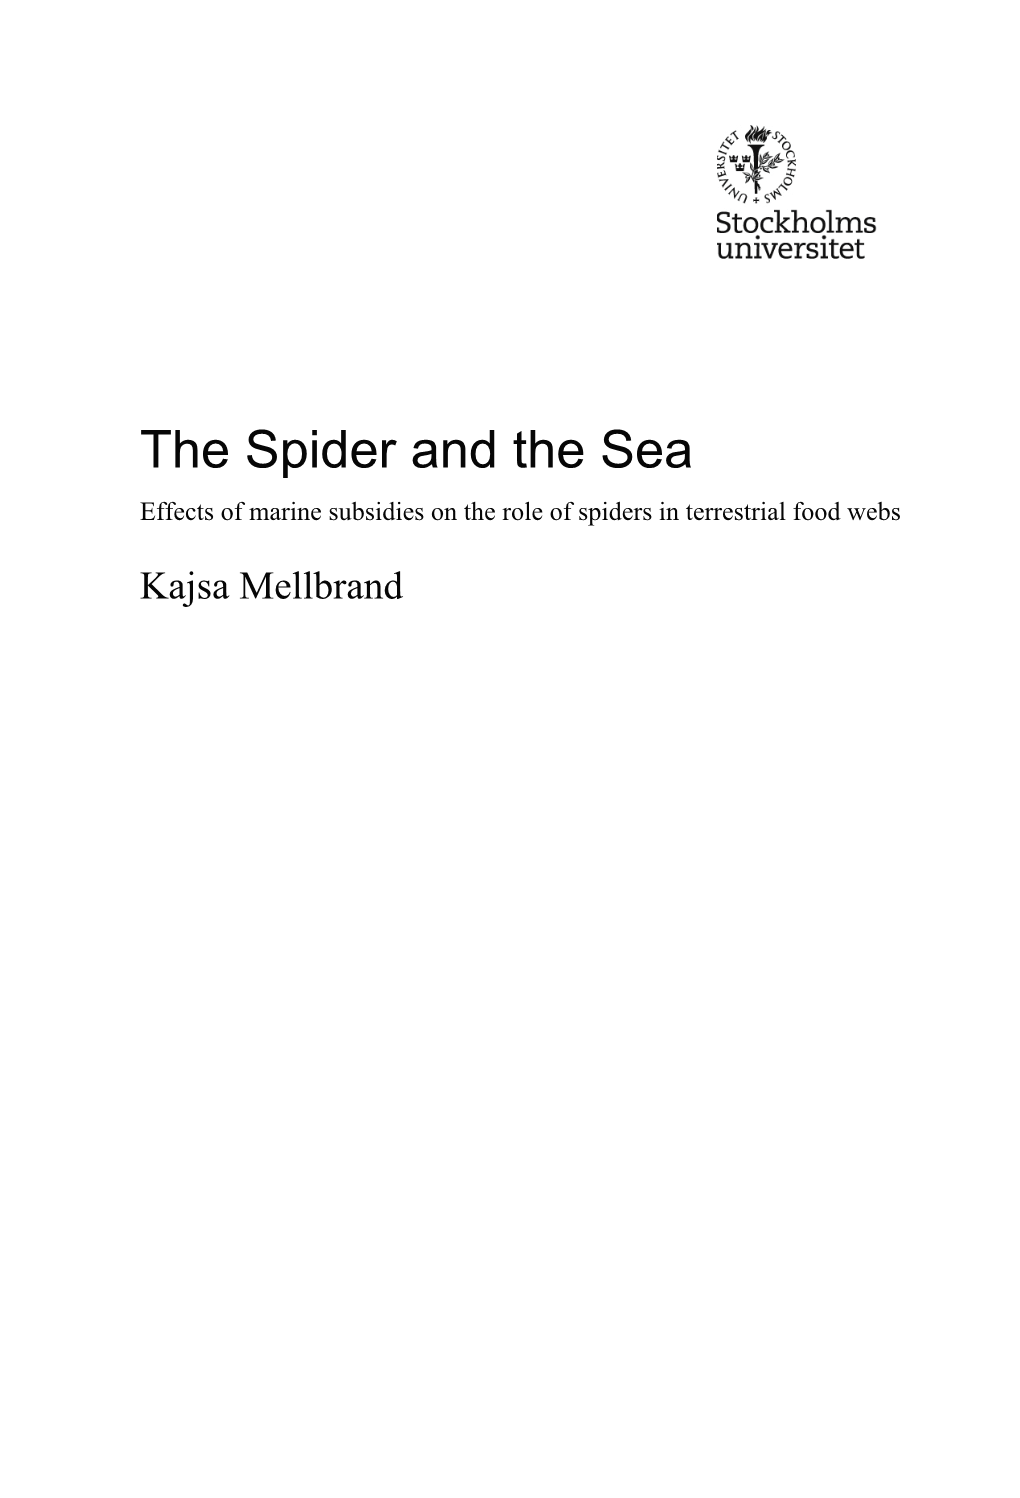 The Spider and the Sea Effects of Marine Subsidies on the Role of Spiders in Terrestrial Food Webs